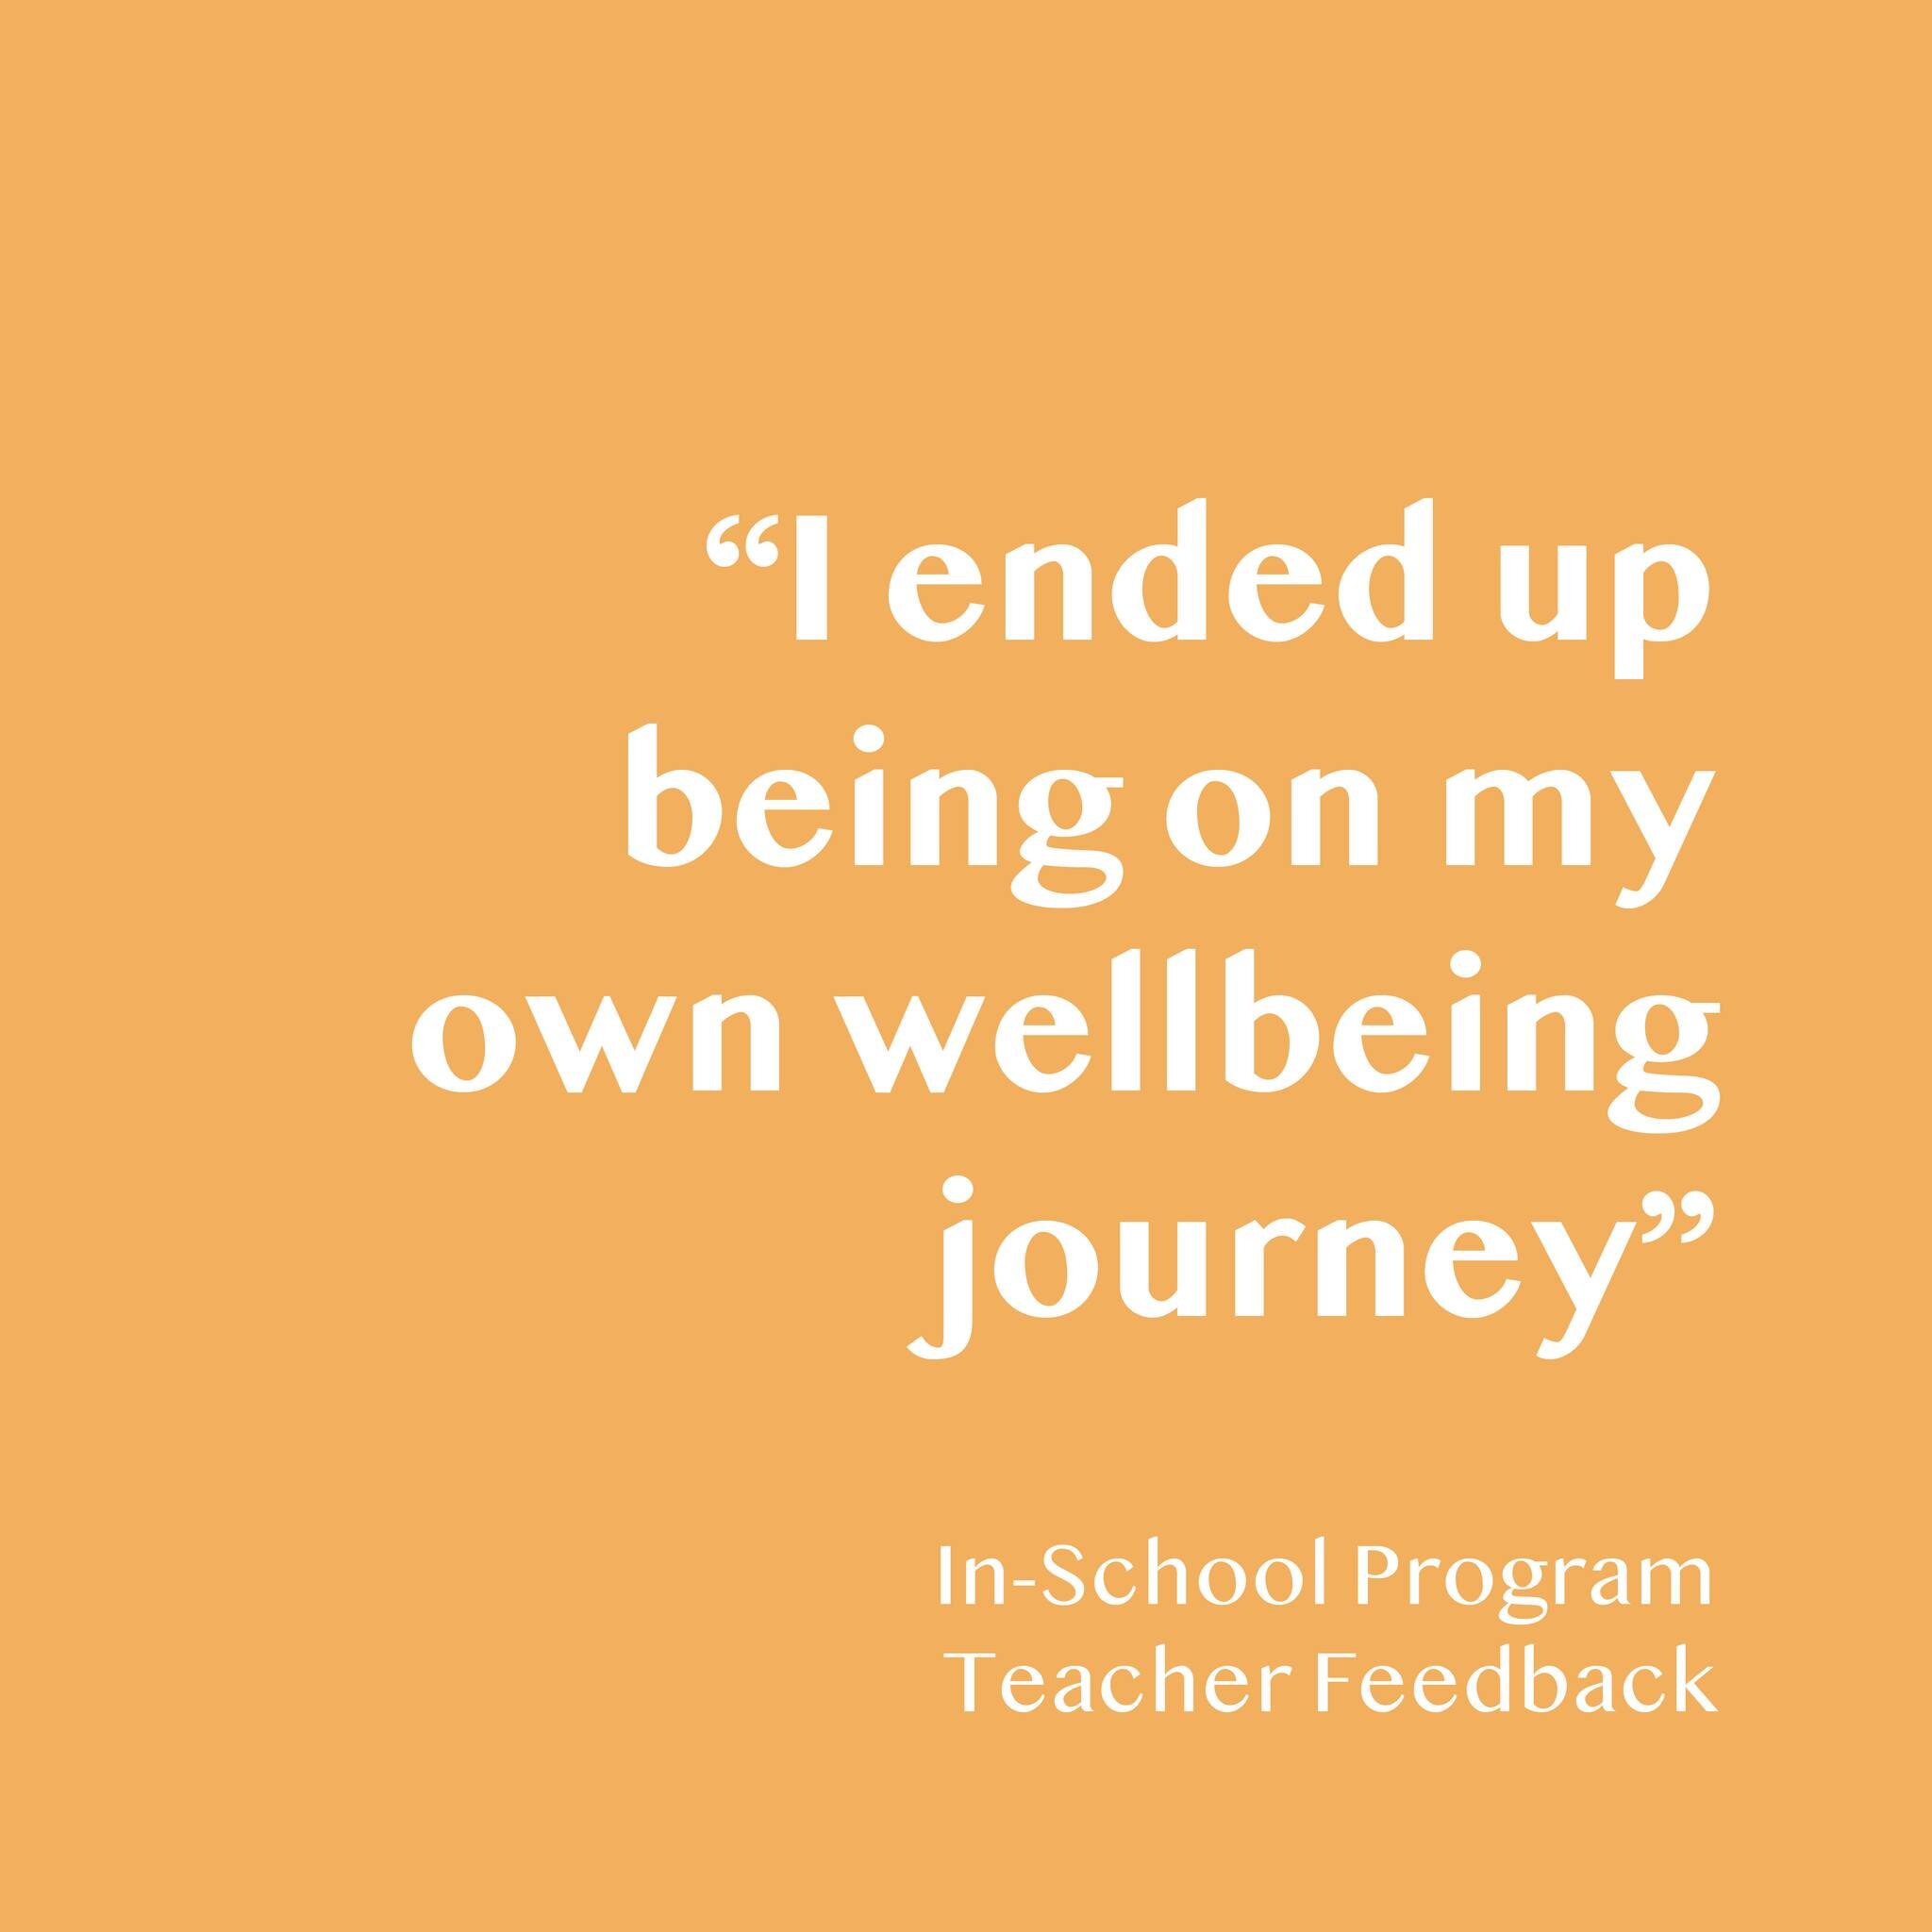 Hearing teachers also benefit from our In-School Program is everything. Our In-School Program provides teachers with simple to use resources and strategies for use in their classroom. Head to our website to learn more about the program and how to acc